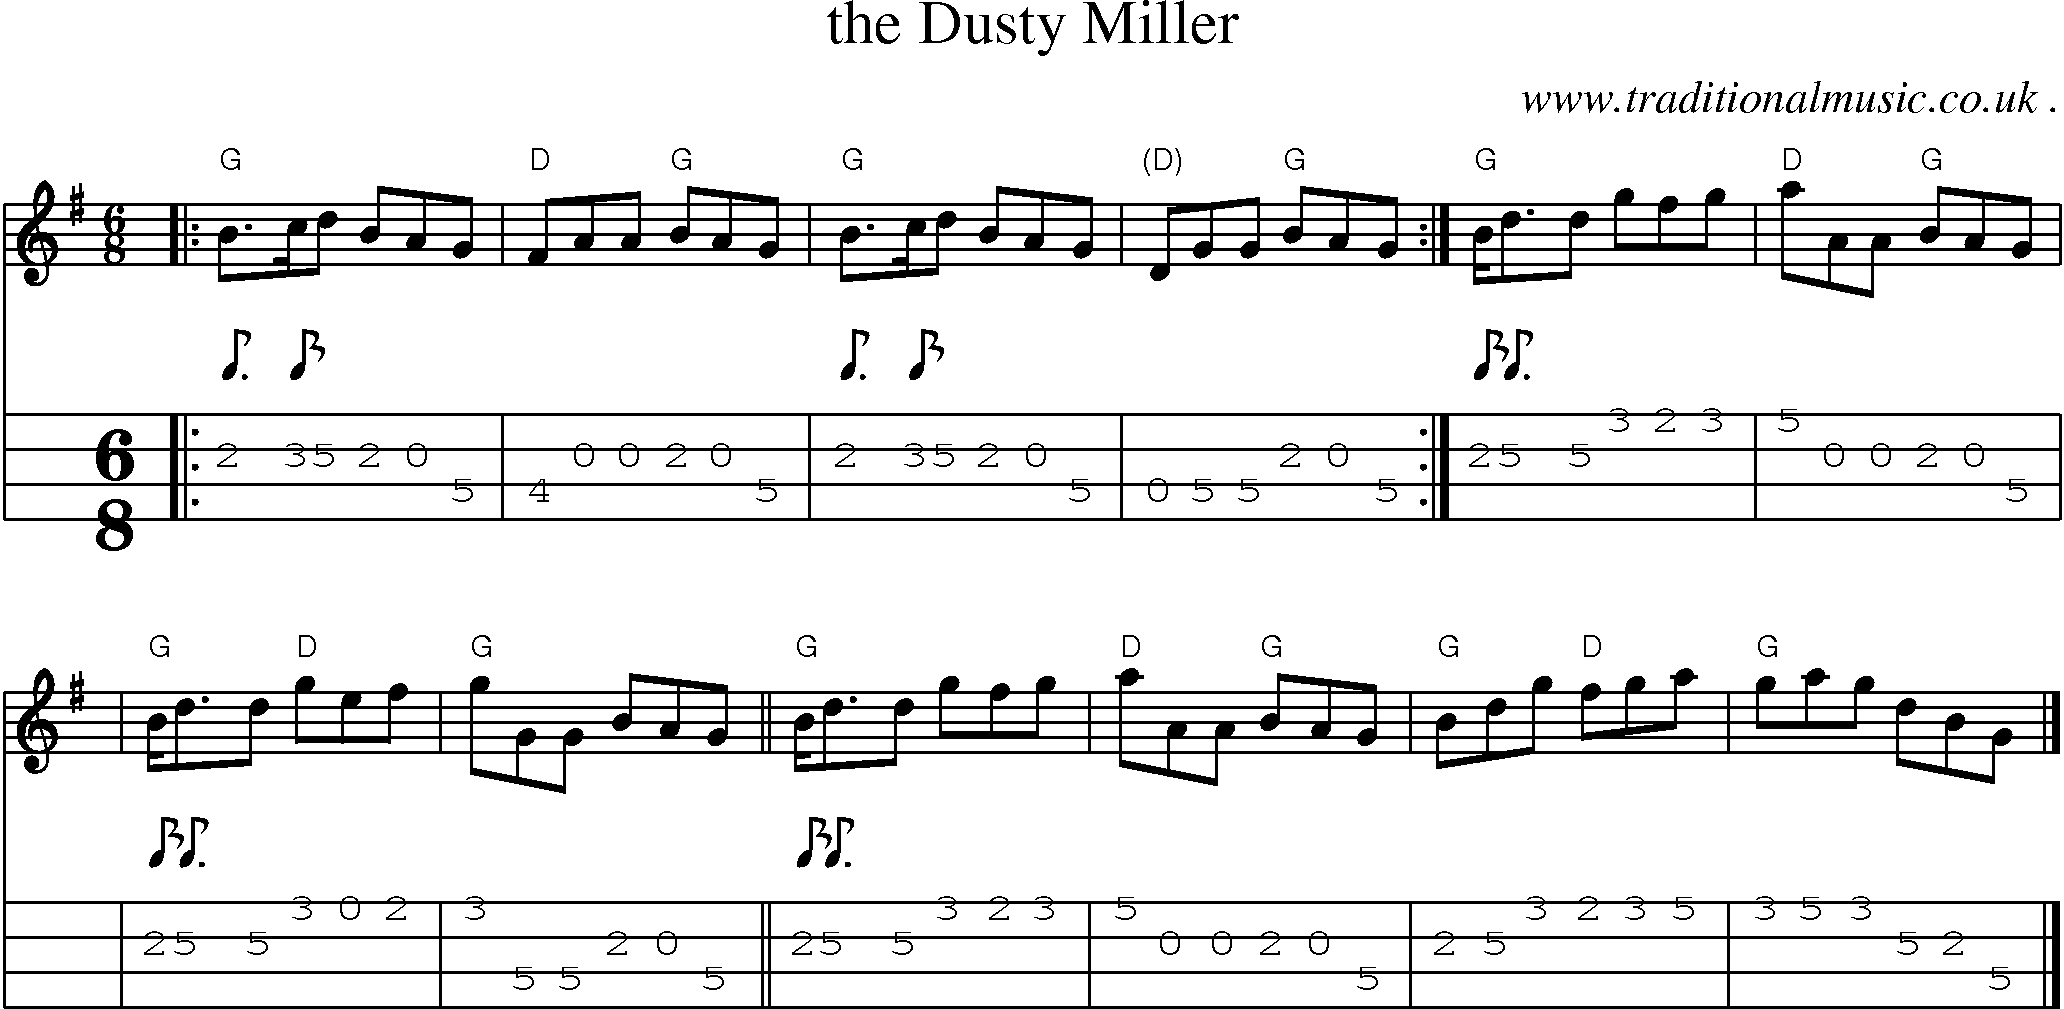 Sheet-music  score, Chords and Mandolin Tabs for The Dusty Miller